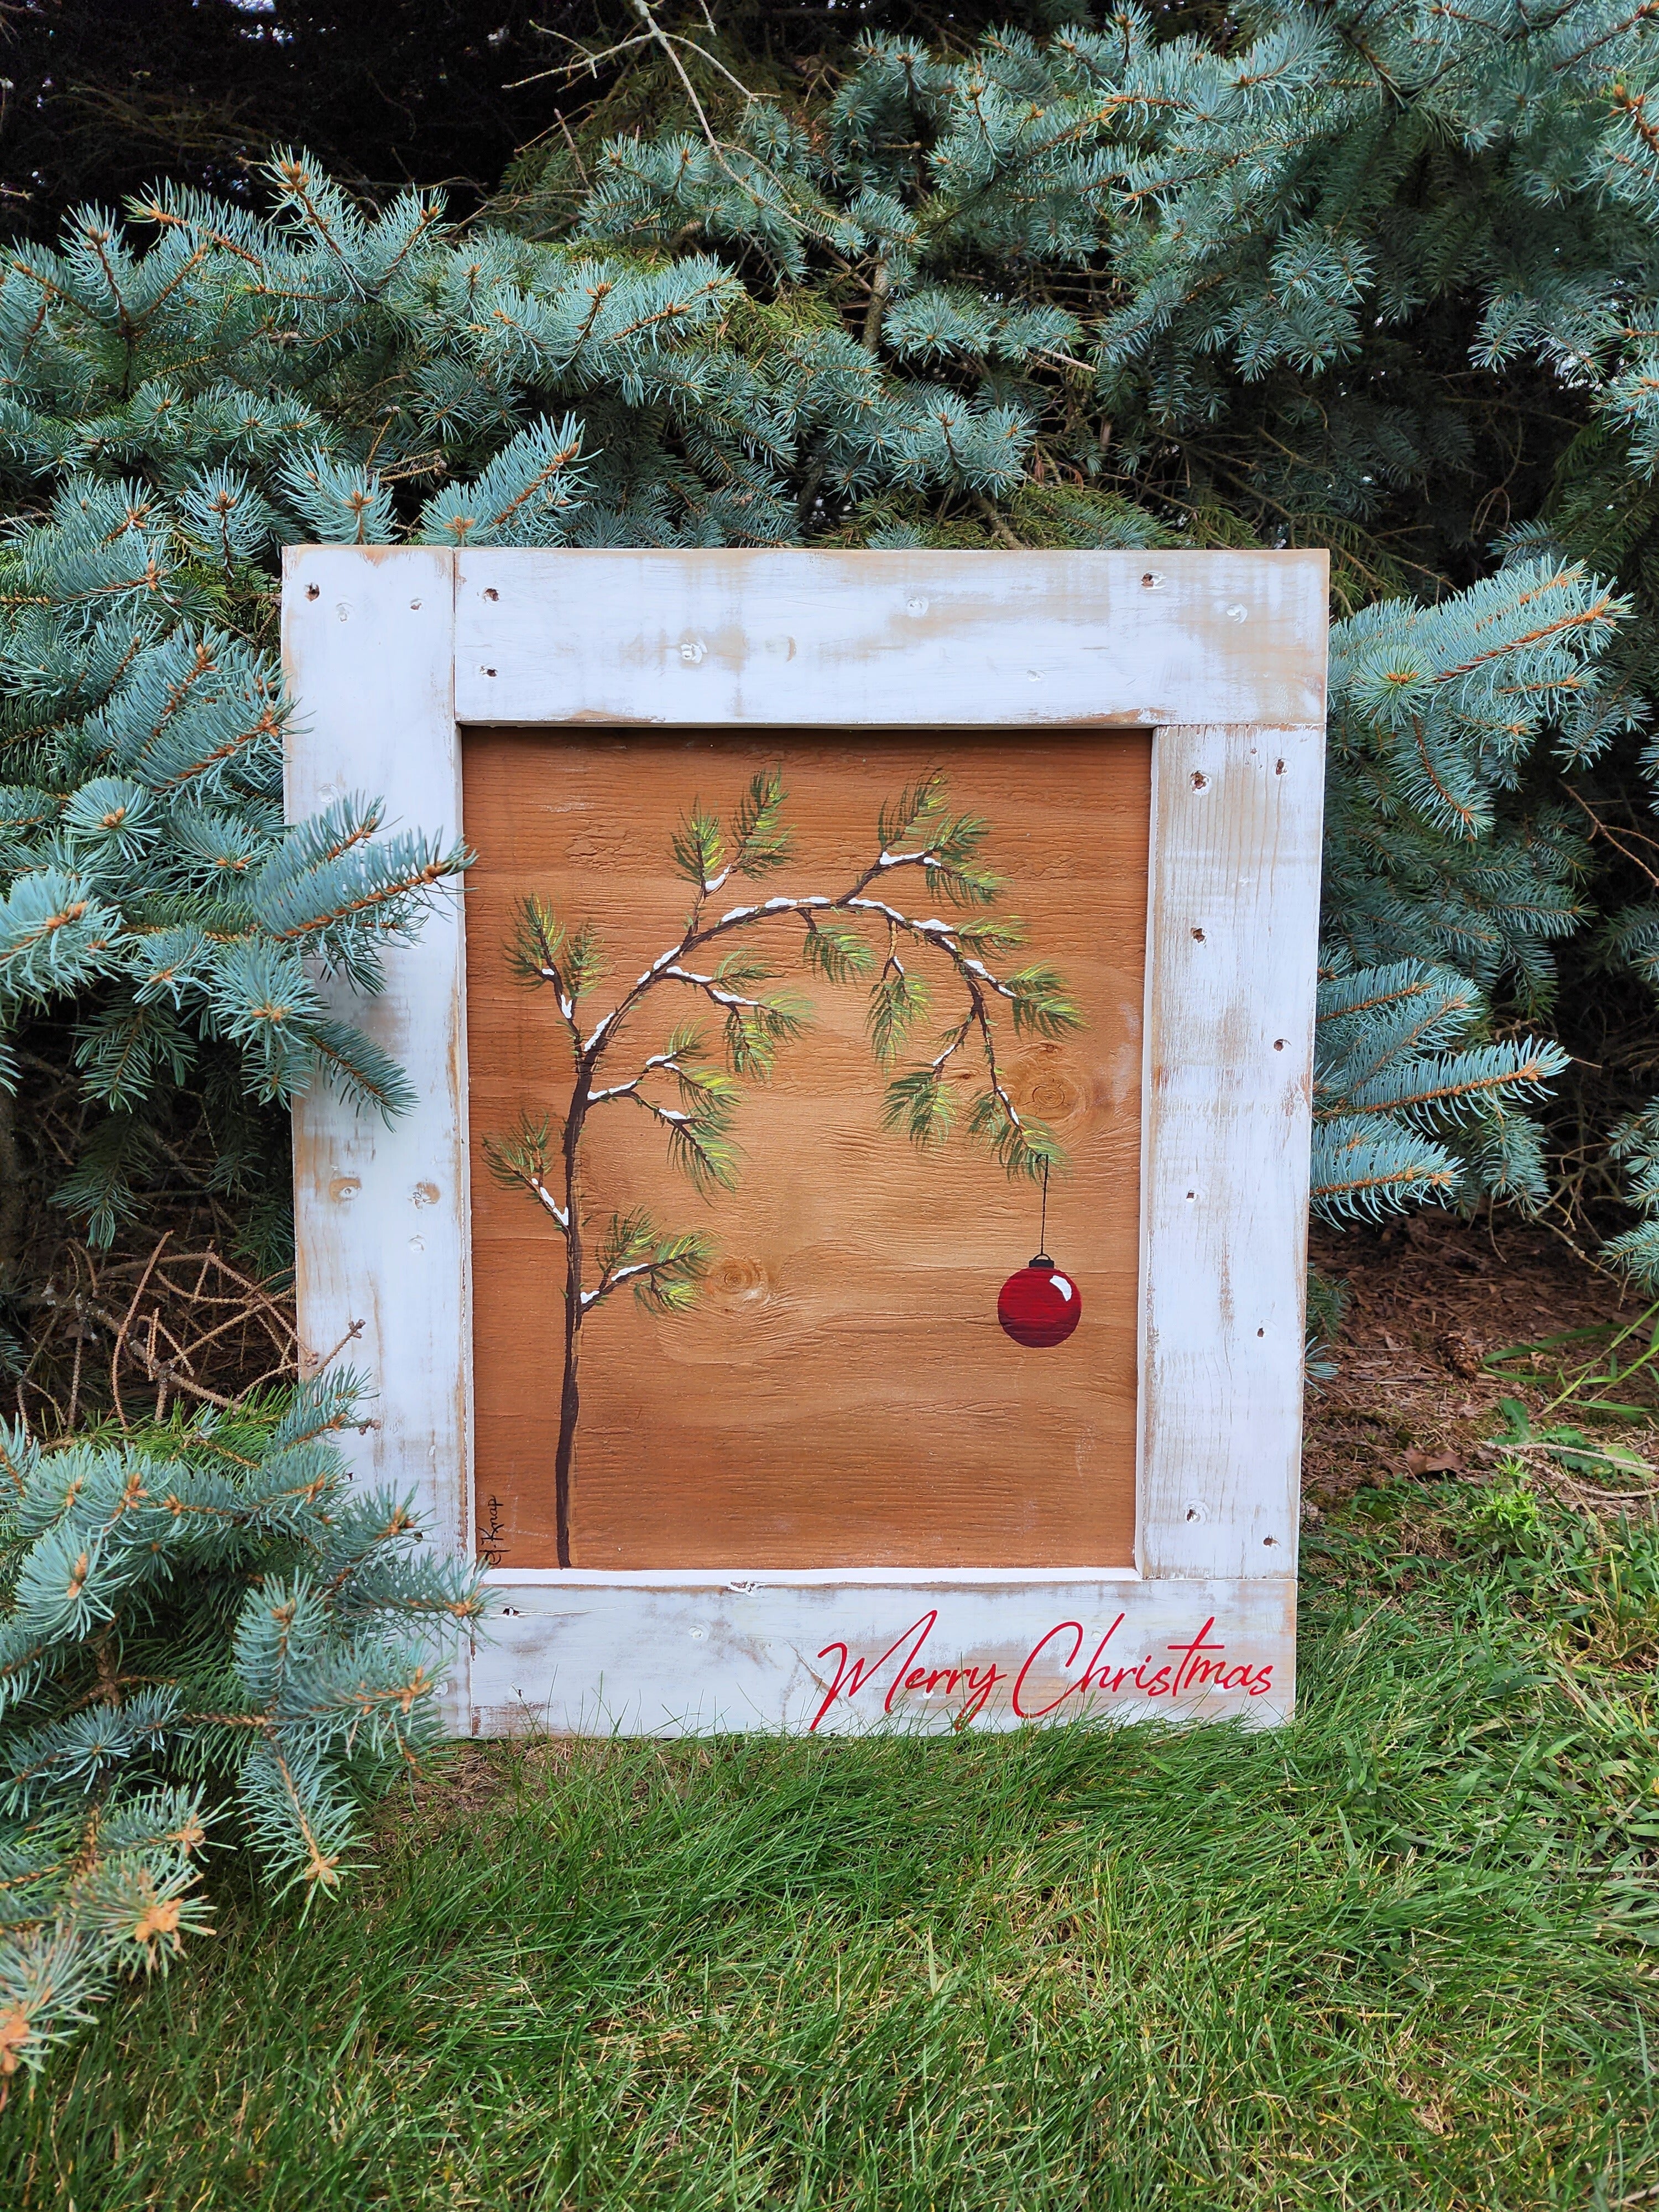 Hand painted Charlie Brown Christmas tree on recycled pallet wood, Red Merry Christmas word sign, classic red Christmas bulb, Aged white, frame